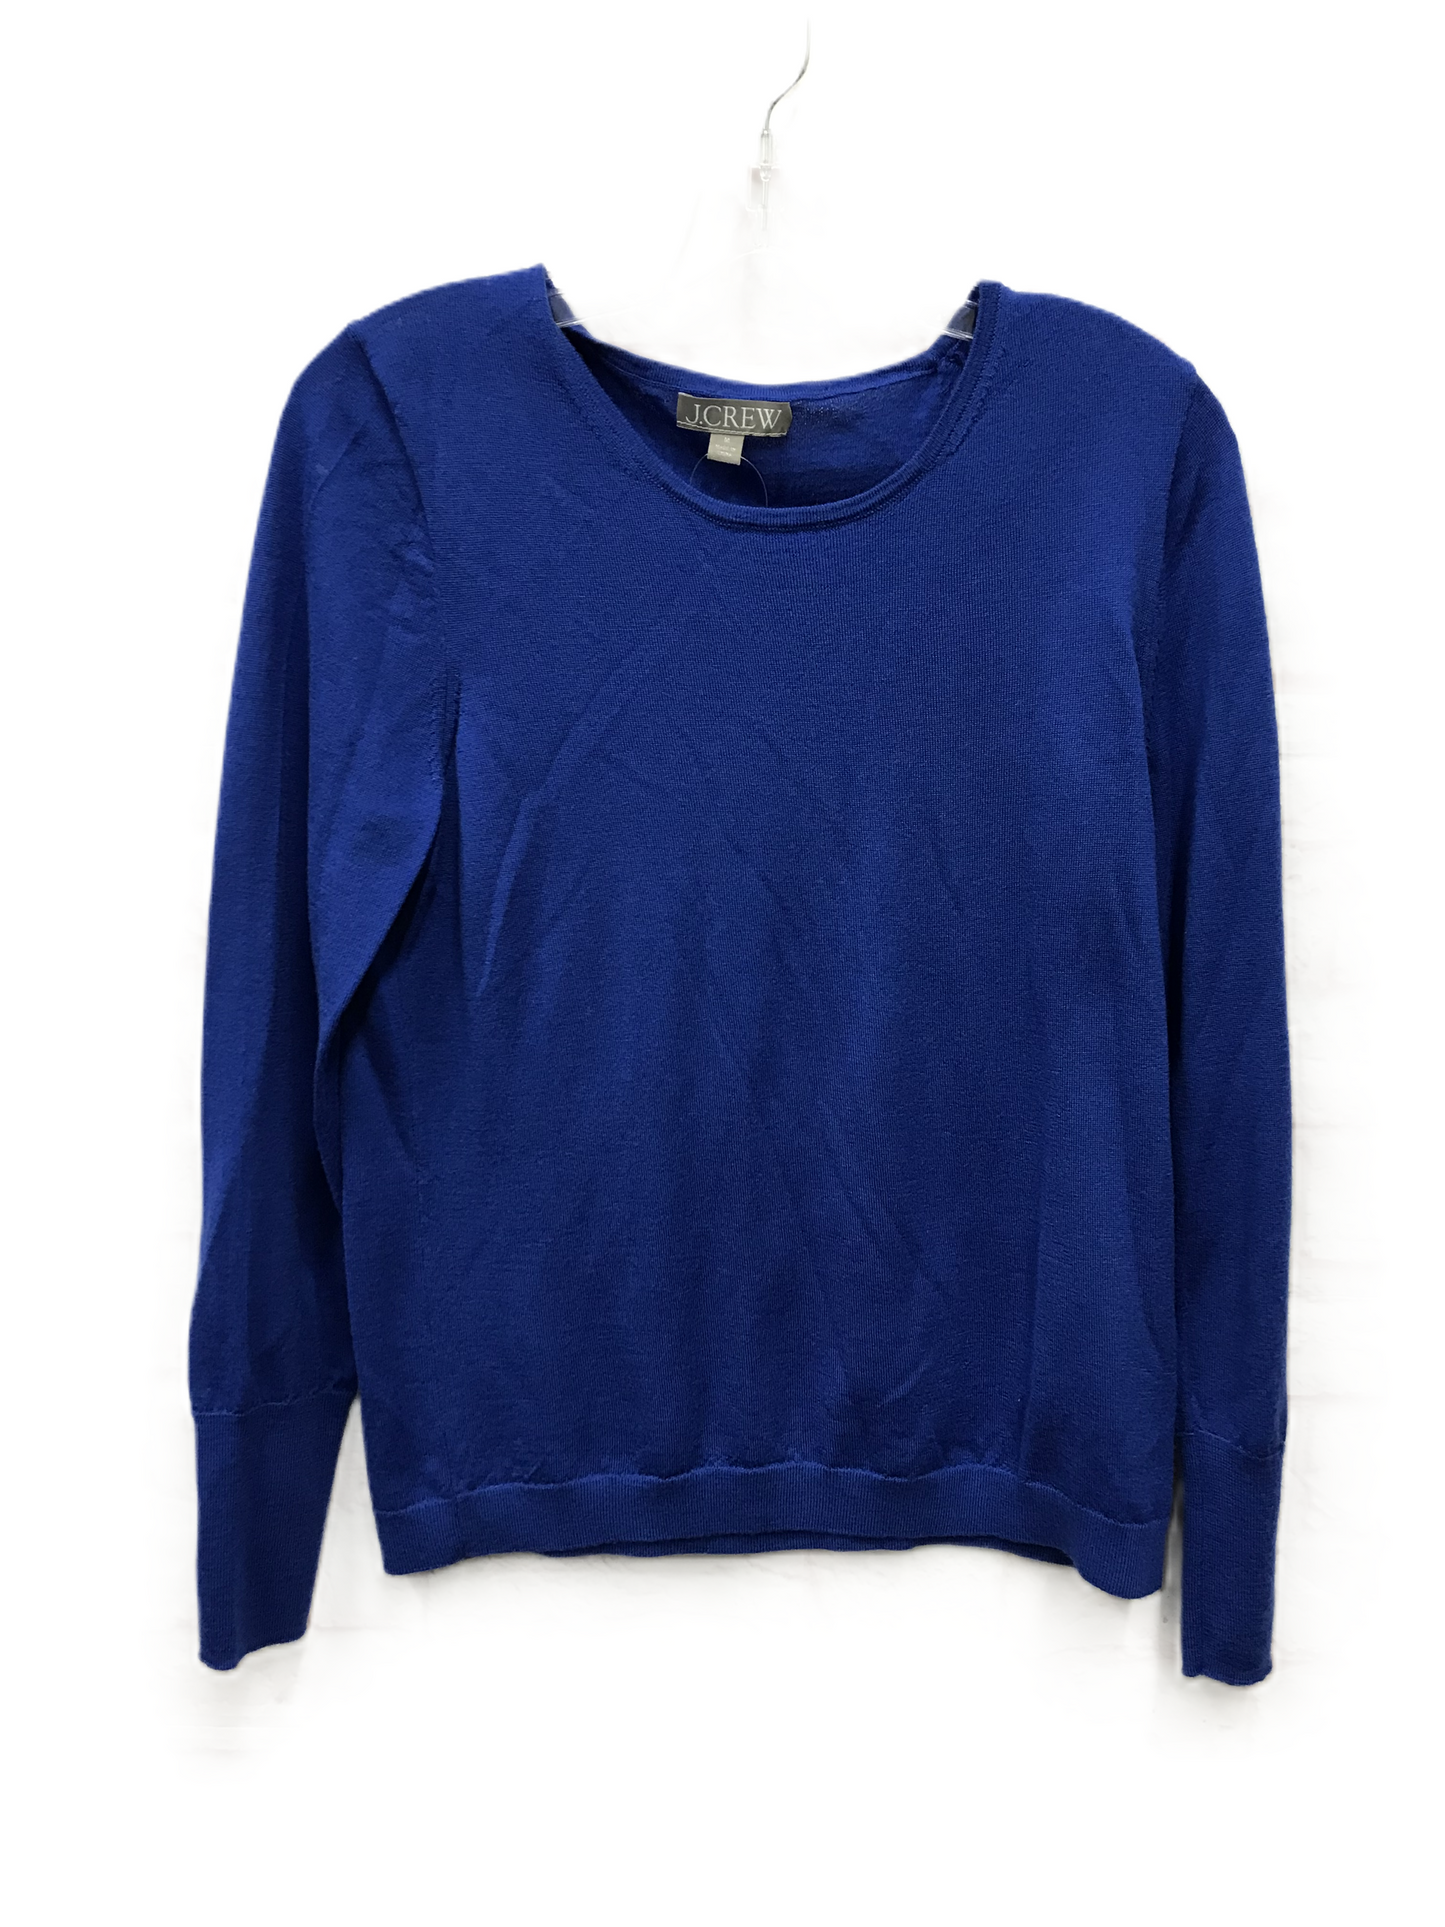 Blue Sweater By J. Crew, Size: M